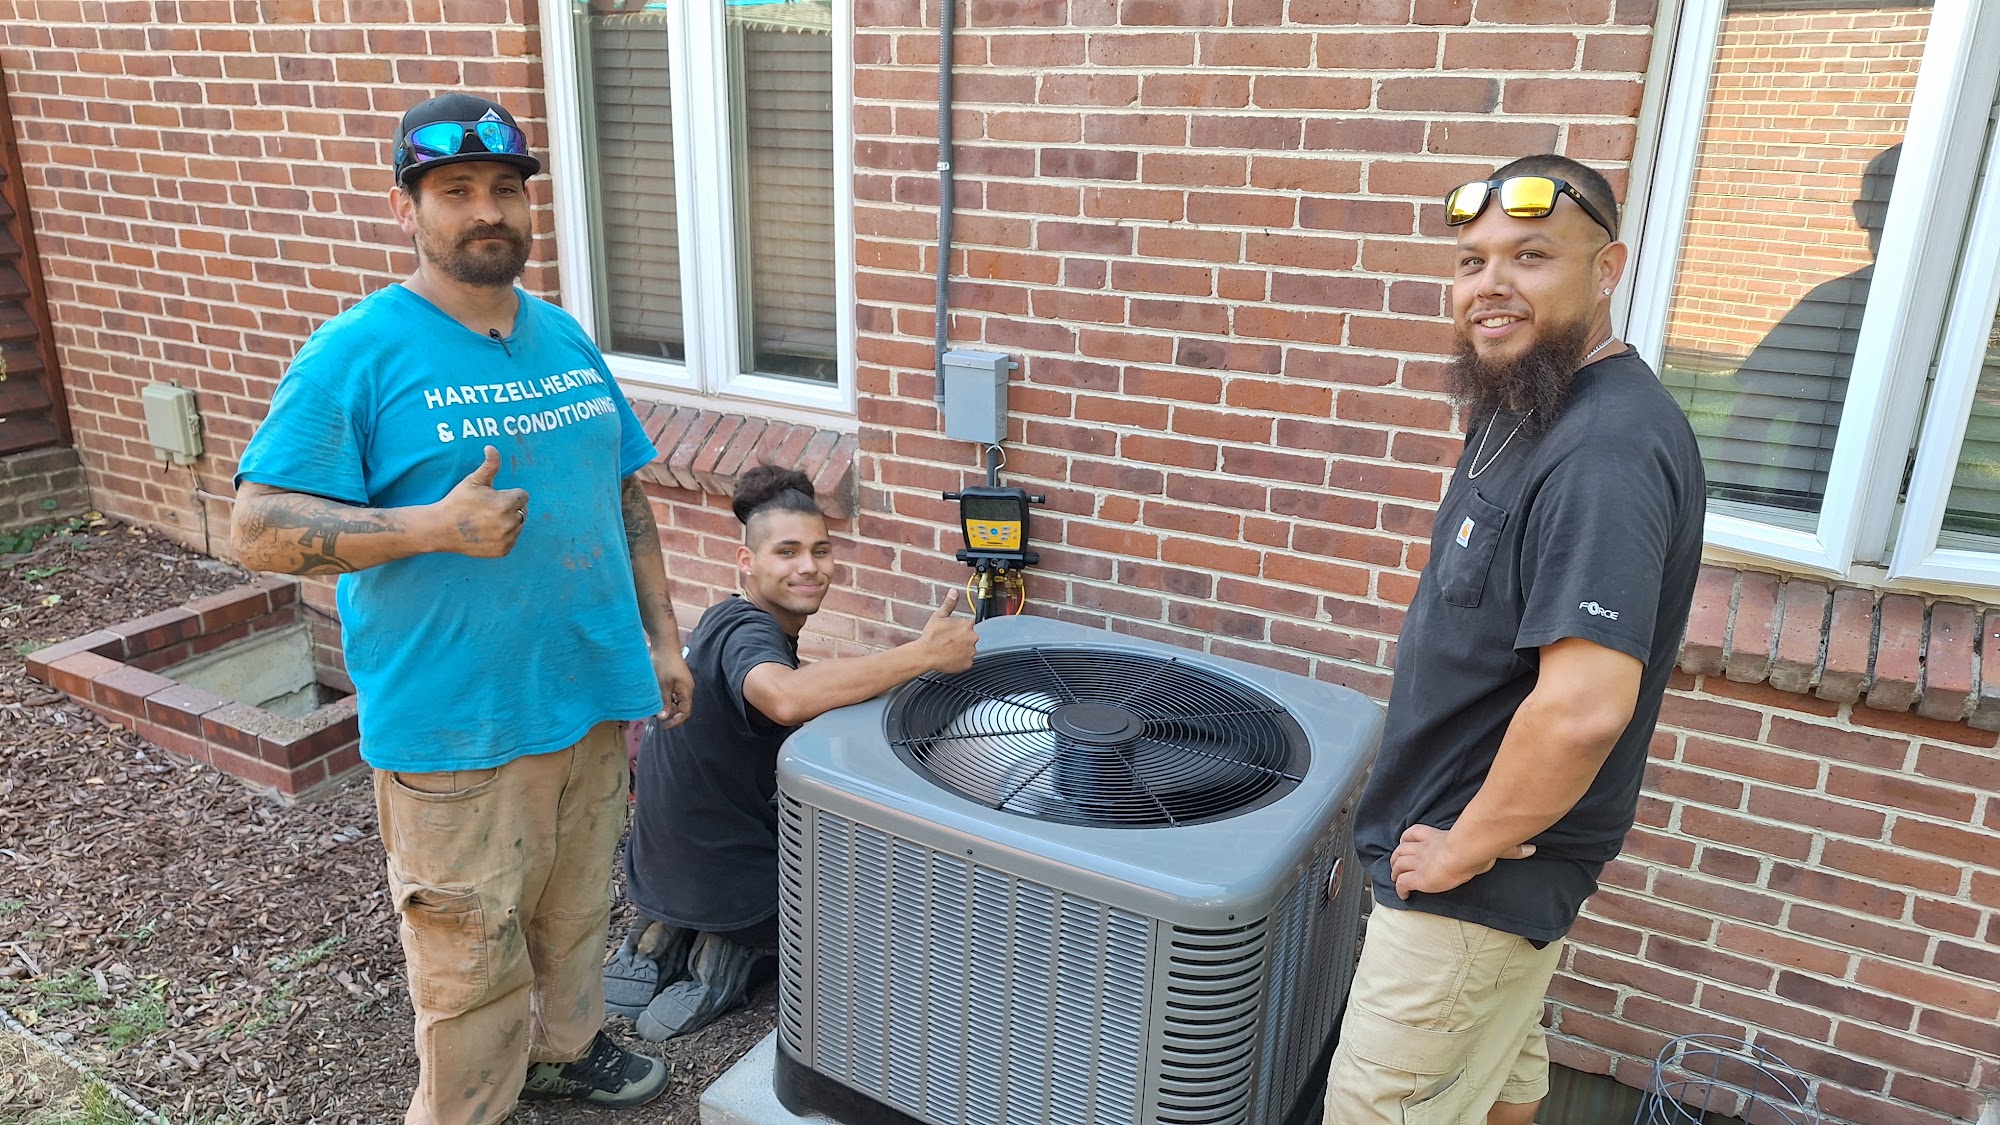 Hartzell Heating & Air Conditioning